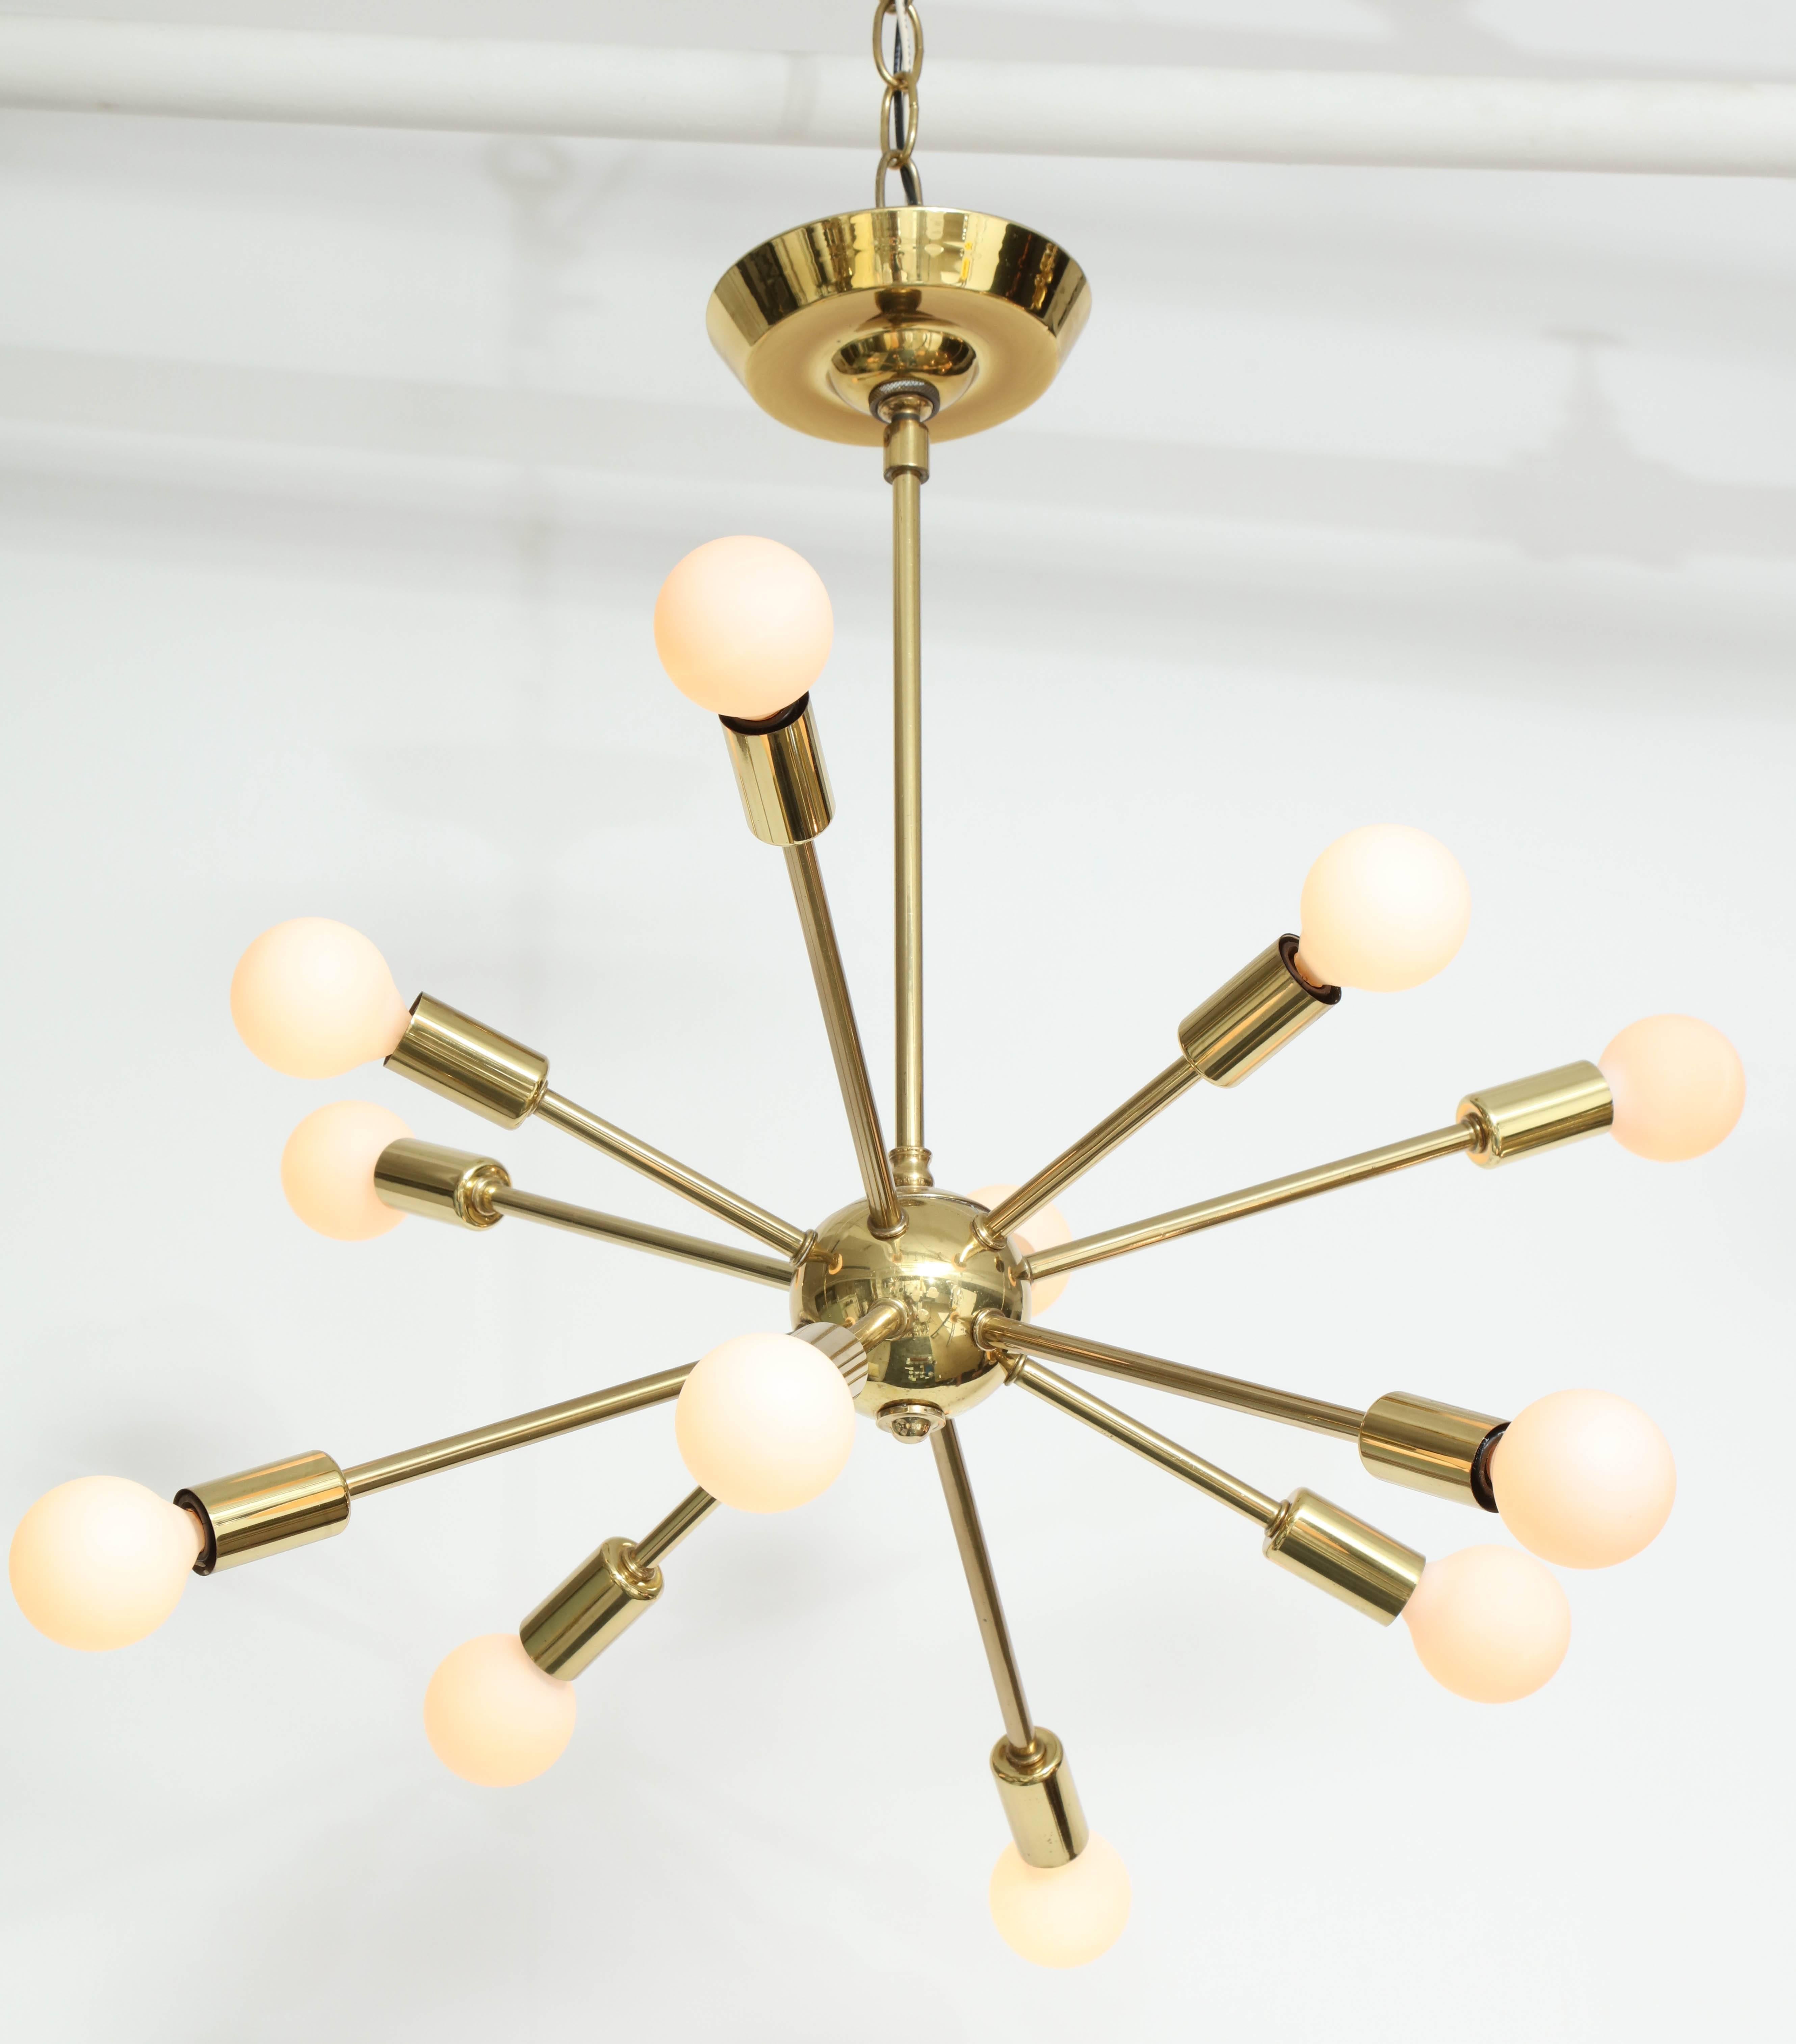 Majestic Lamp Company of New York's brass 10 arm sputnik with brass sphere made circa 1960s. This piece retains it's original label on the brass canopy. 

The Majestic Lamp Company was formed out of two other companies; the Grigsby-Grunow Company